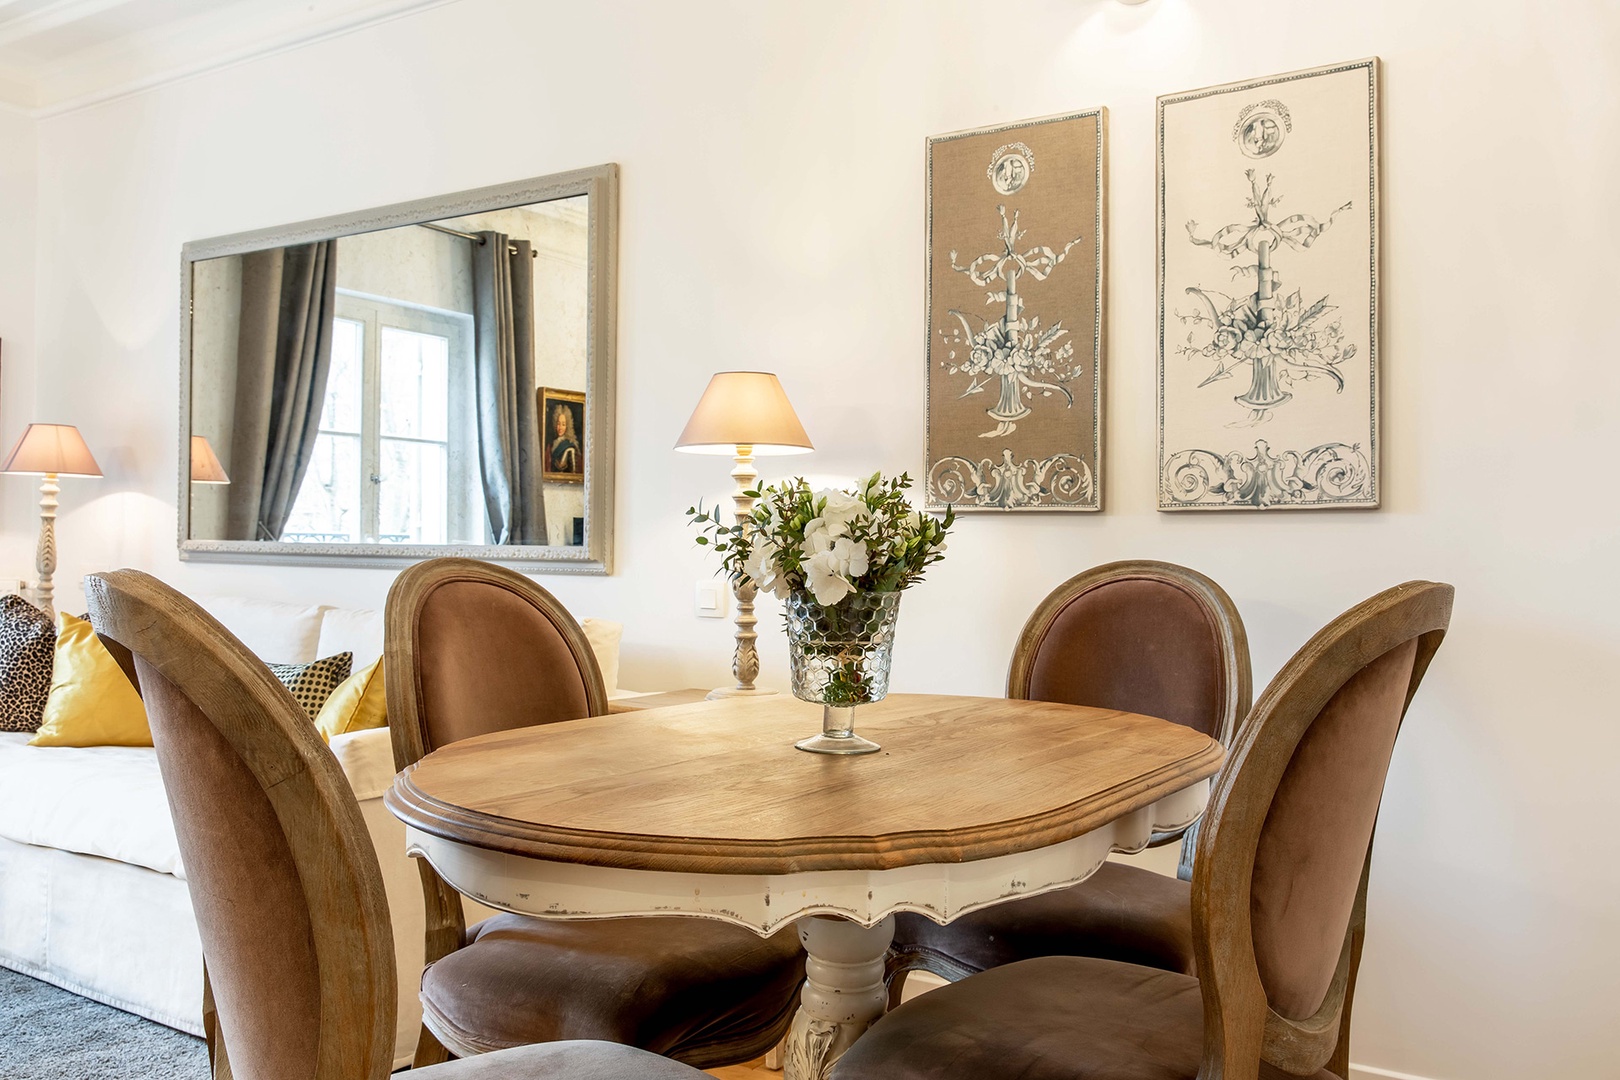 The French oak dining table comfortably seats four.